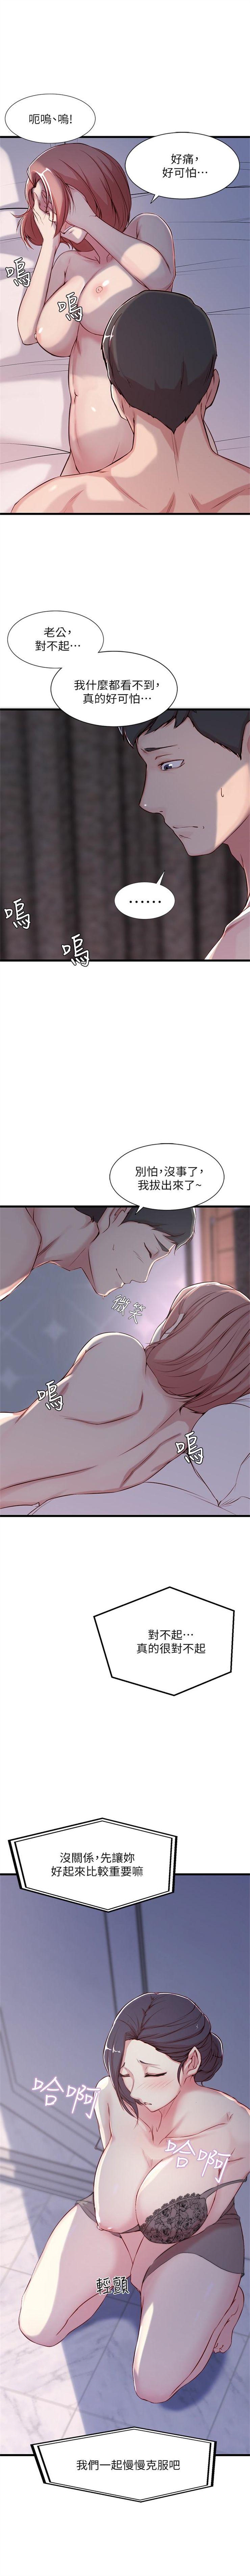 Old Young 老婆的姊姊 1-30 官方中文（連載中） Missionary - Page 9